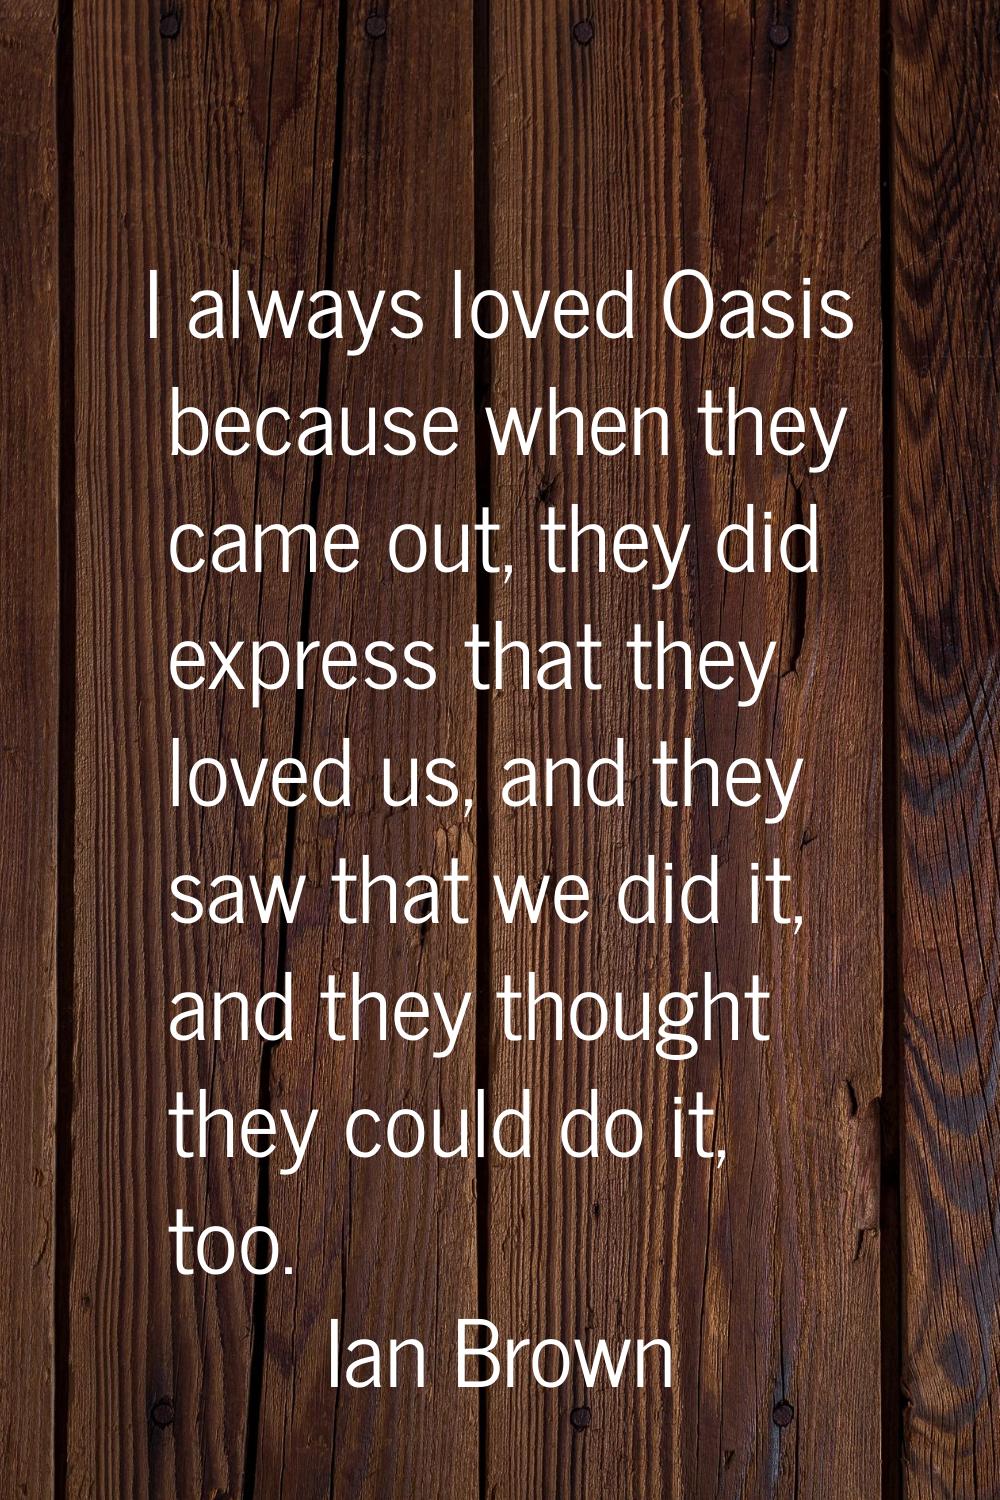 I always loved Oasis because when they came out, they did express that they loved us, and they saw 